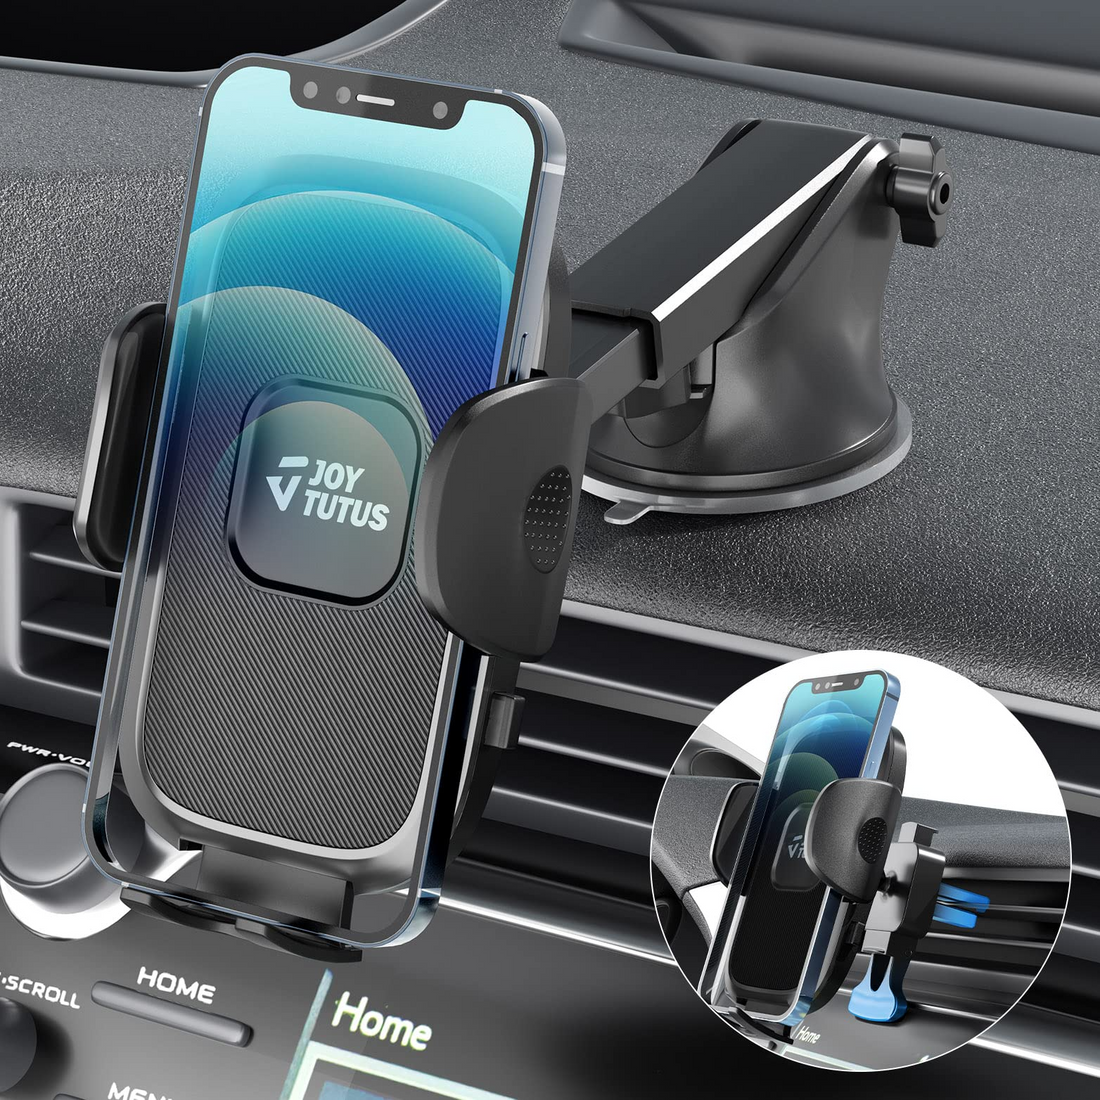 Car Cup Holder Phone Mount,3 in 1, Universal Fit iPhone, Samsung, LG with Screen size from 4-7 inch